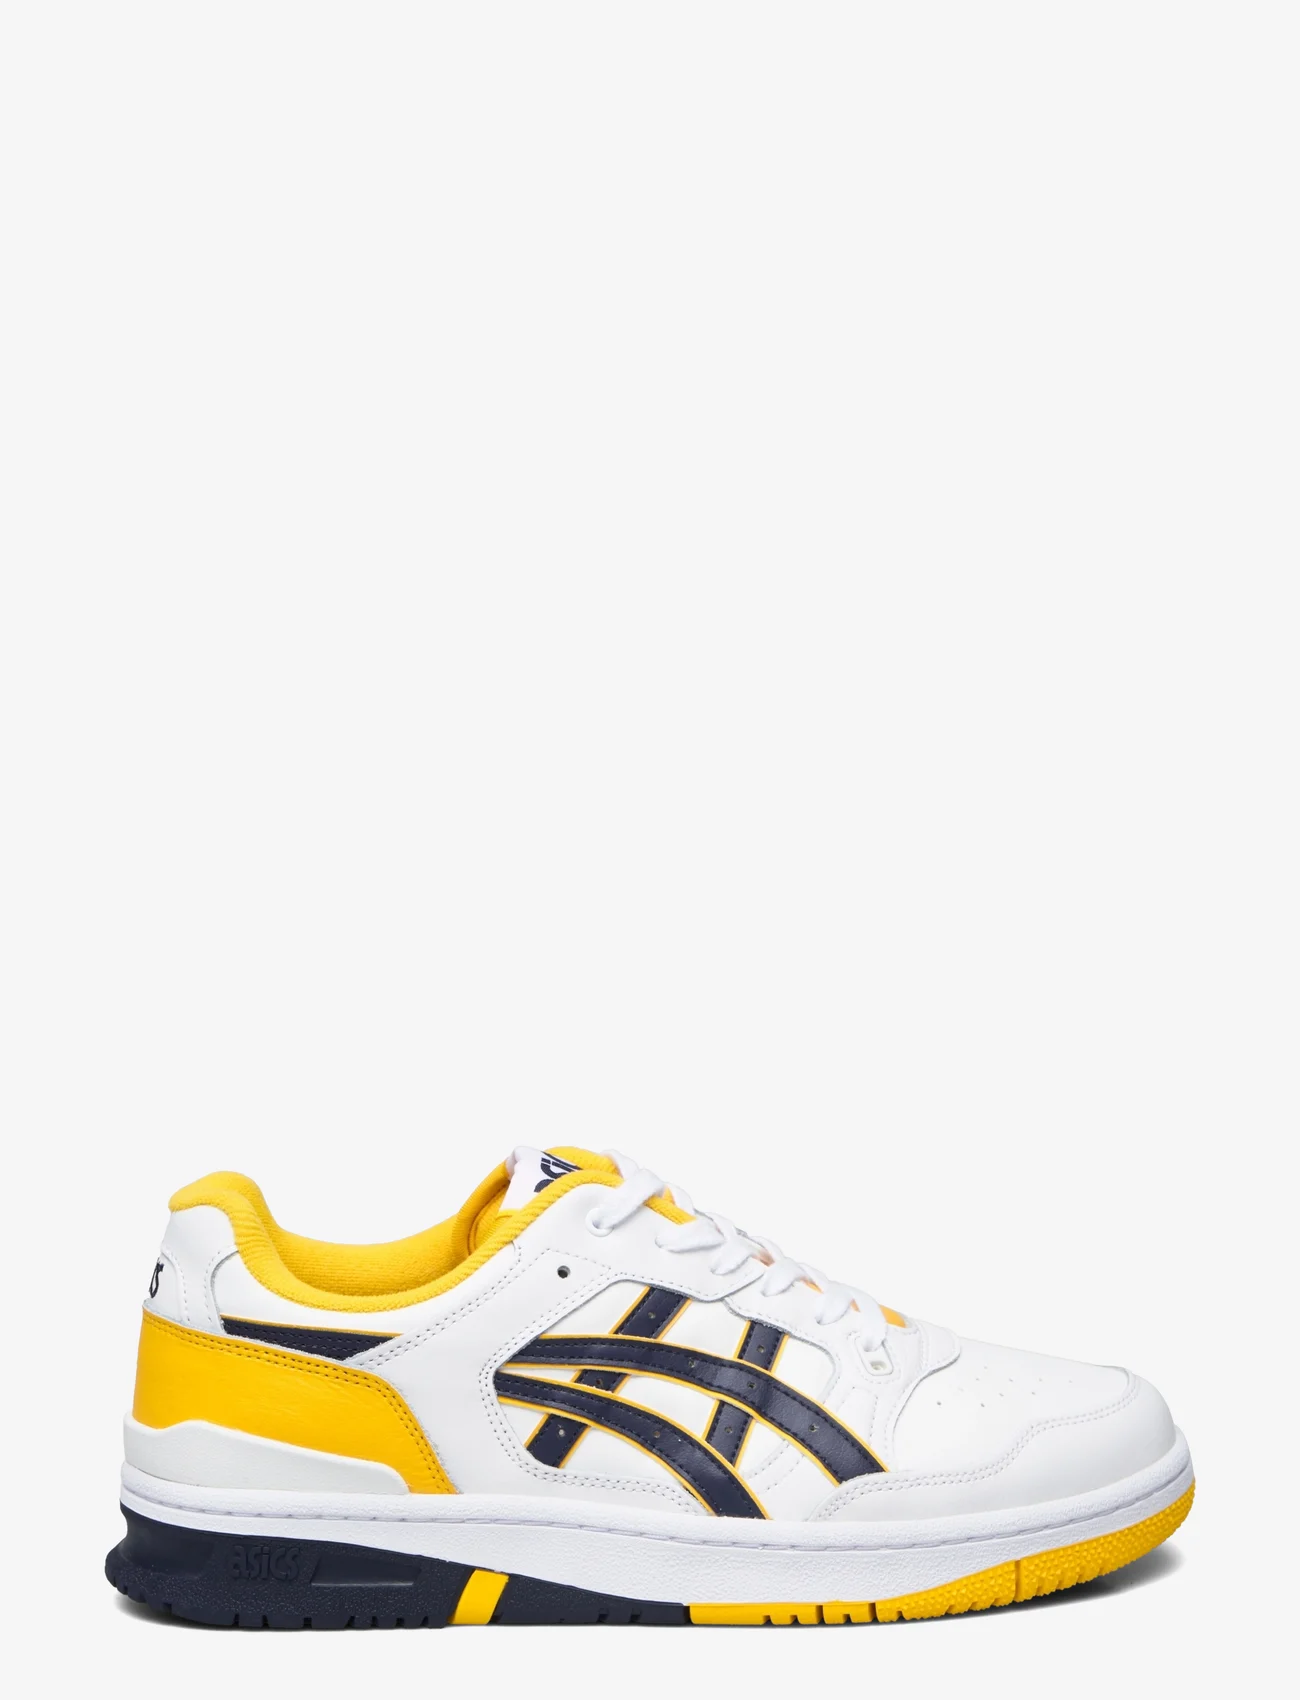 Asics - EX89 - low top sneakers - white/midnight - 1